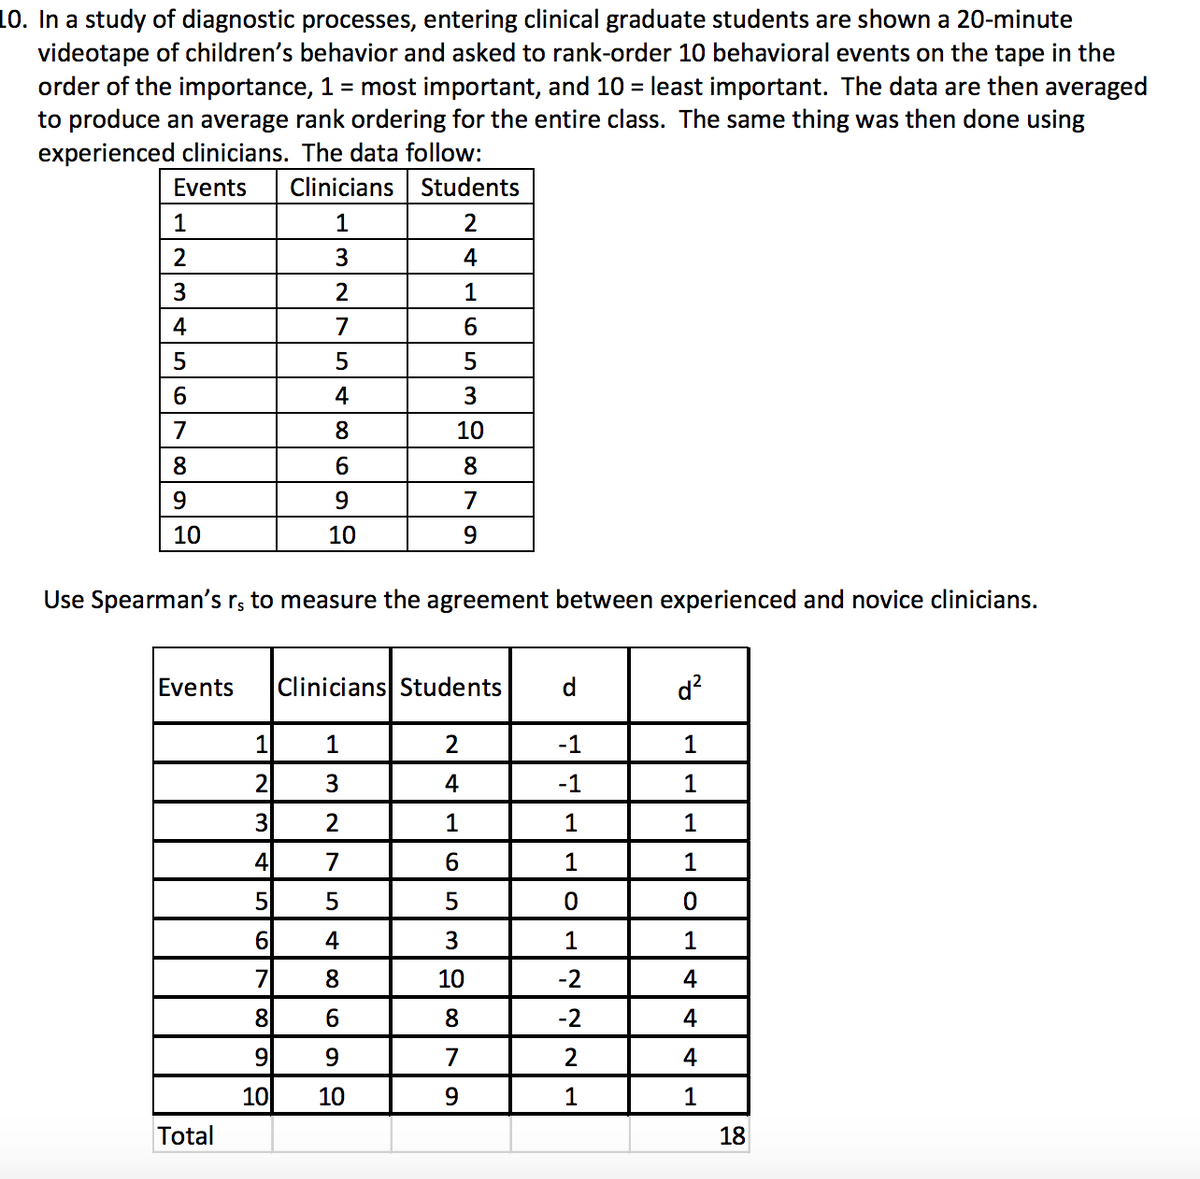 10. In a study of diagnostic processes, entering clinical graduate students are shown a 20-minute
videotape of children's behavior and asked to rank-order 10 behavioral events on the tape in the
order of the importance, 1 = most important, and 10 = least important. The data are then averaged
to produce an average rank ordering for the entire class. The same thing was then done using
experienced clinicians. The data follow:
Events
Clinicians Students
1
1
2
2
4
3
2
1
4
7
5
4
7
8.
10
8
6.
8.
9
7
10
10
Use Spearman's r, to measure the agreement between experienced and novice clinicians.
Events
Clinicians Students
d.
d?
1
1
2
-1
3
4
-1
1
3
2
1
1
1
4
7
6
1
1
5
5
4
3
1
1
7
8.
10
-2
4
8
8
-2
4
9
9.
7
4
10
10
9.
1
1
Total
18
